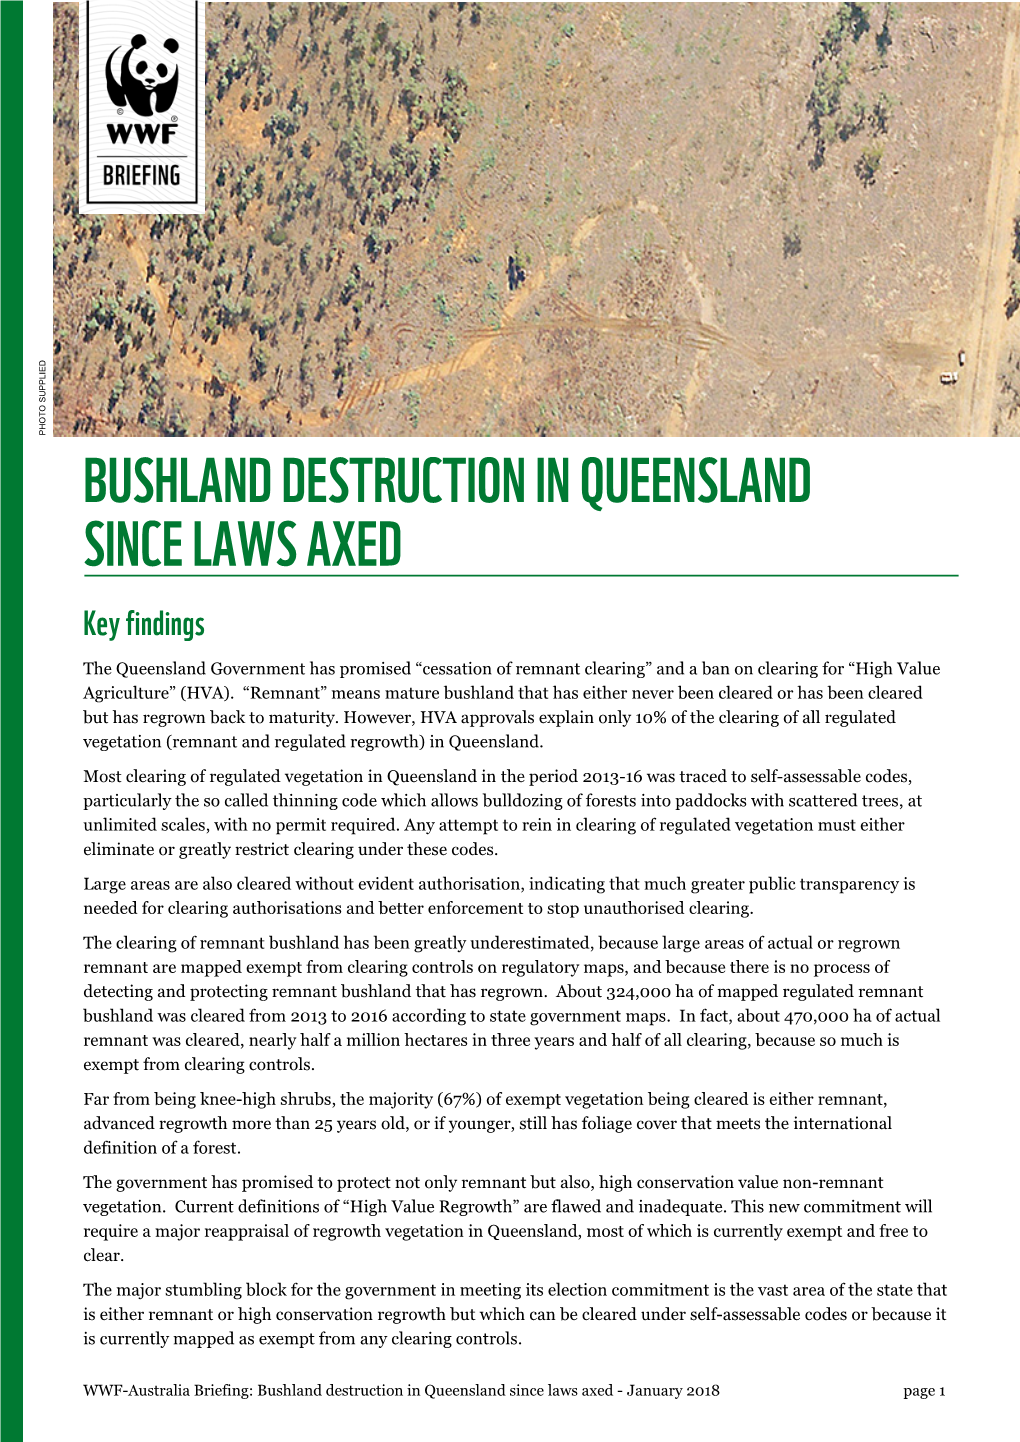 Briefing: Bushland Destruction in Queensland Since Laws Axed - January 2018 Page 1